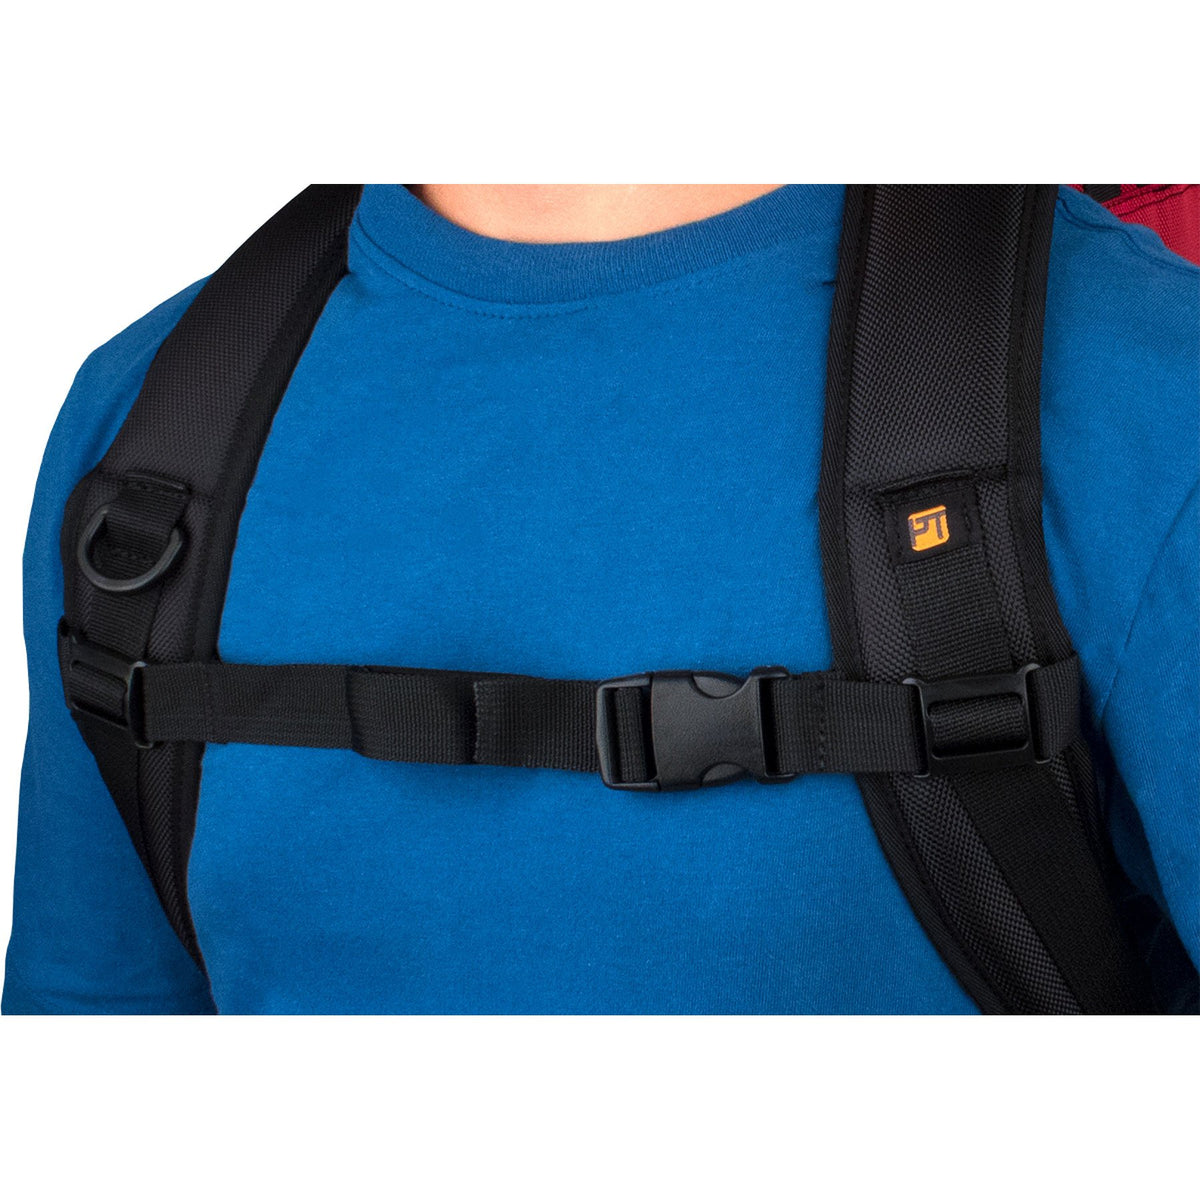 Protec - Optional Padded Backpack Strap-Accessories-Protec-Music Elements